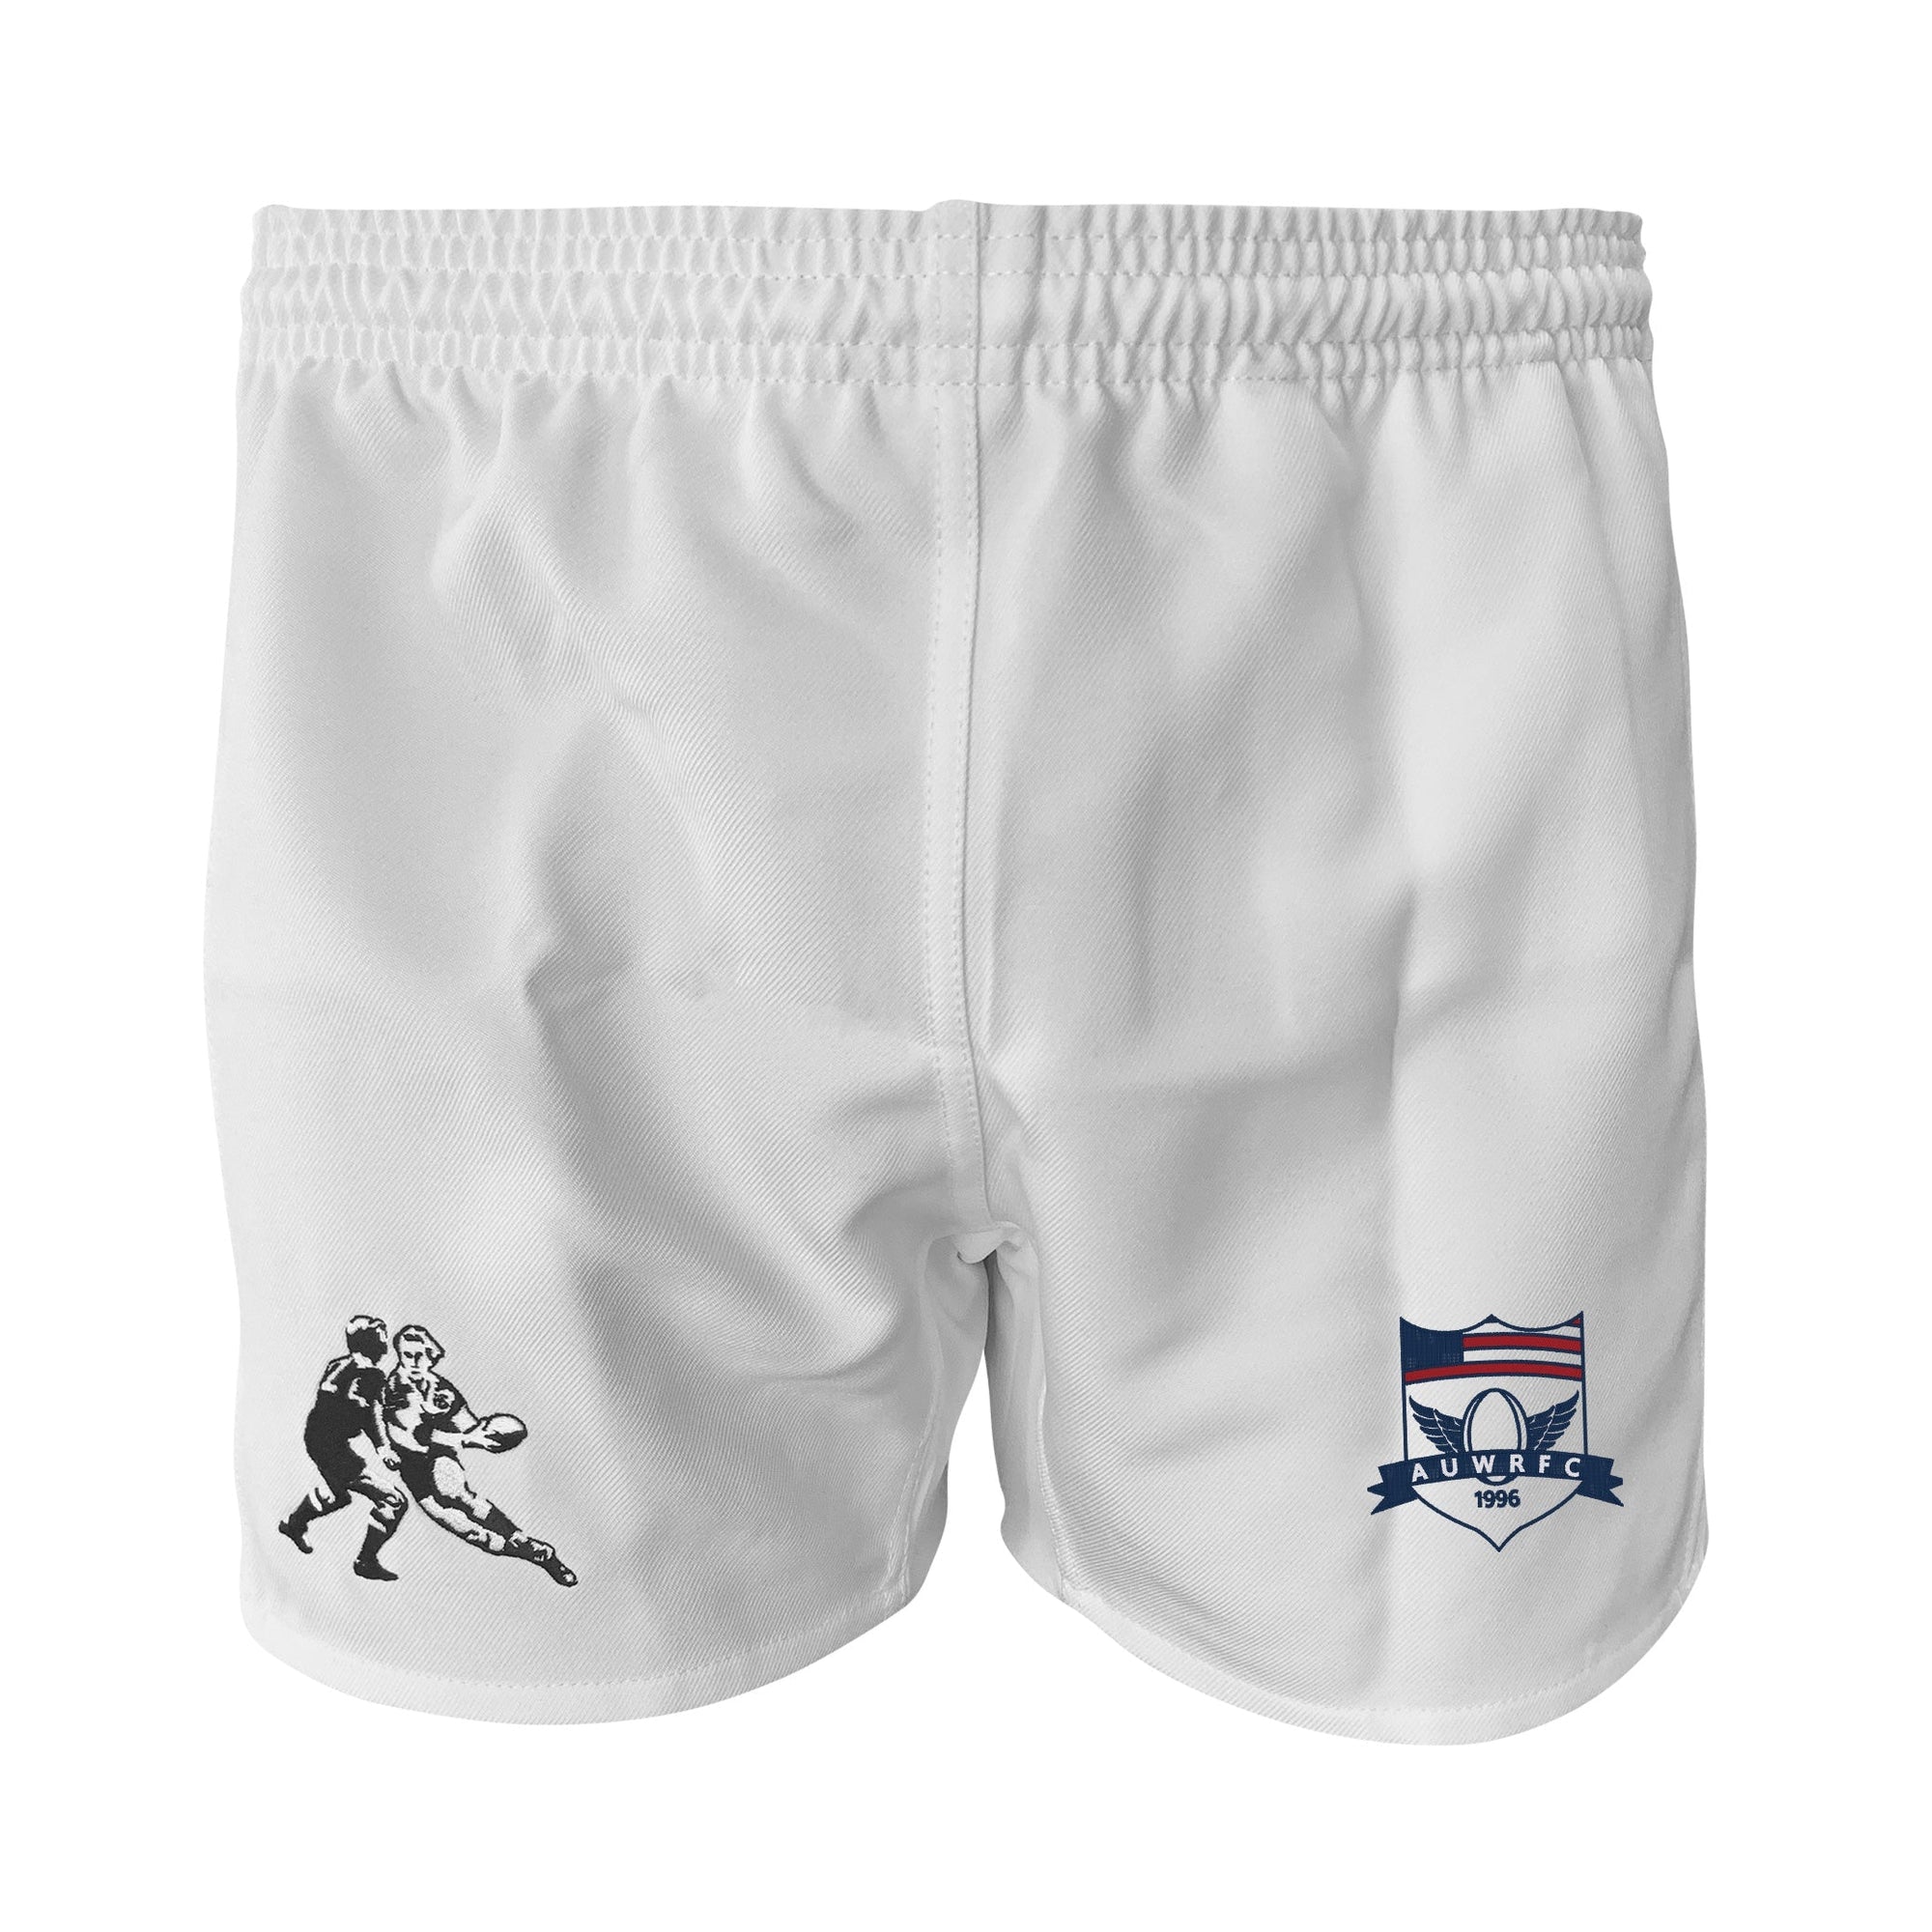 Rugby Imports American Univ. WRFC Pro Power Rugby Shorts